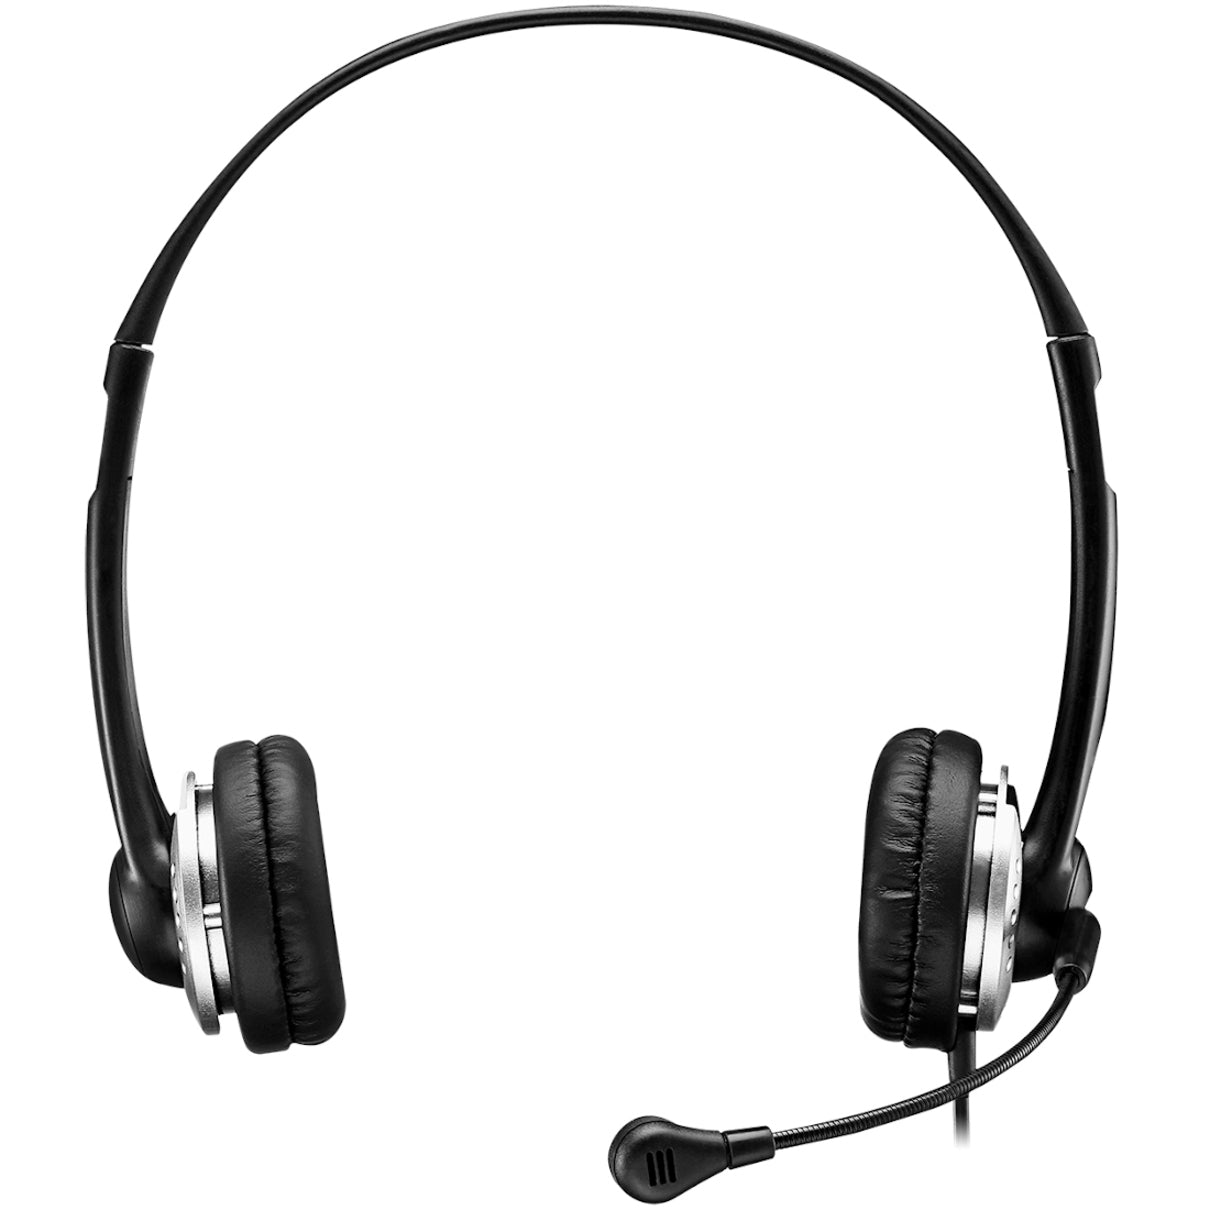 Adesso USB Stereo Headset with Adjustable Microphone- Noise Cancelling- Mono - USB - Wired - Over-the-head - 6 ft Cable - Omni-directional Microphone - Black